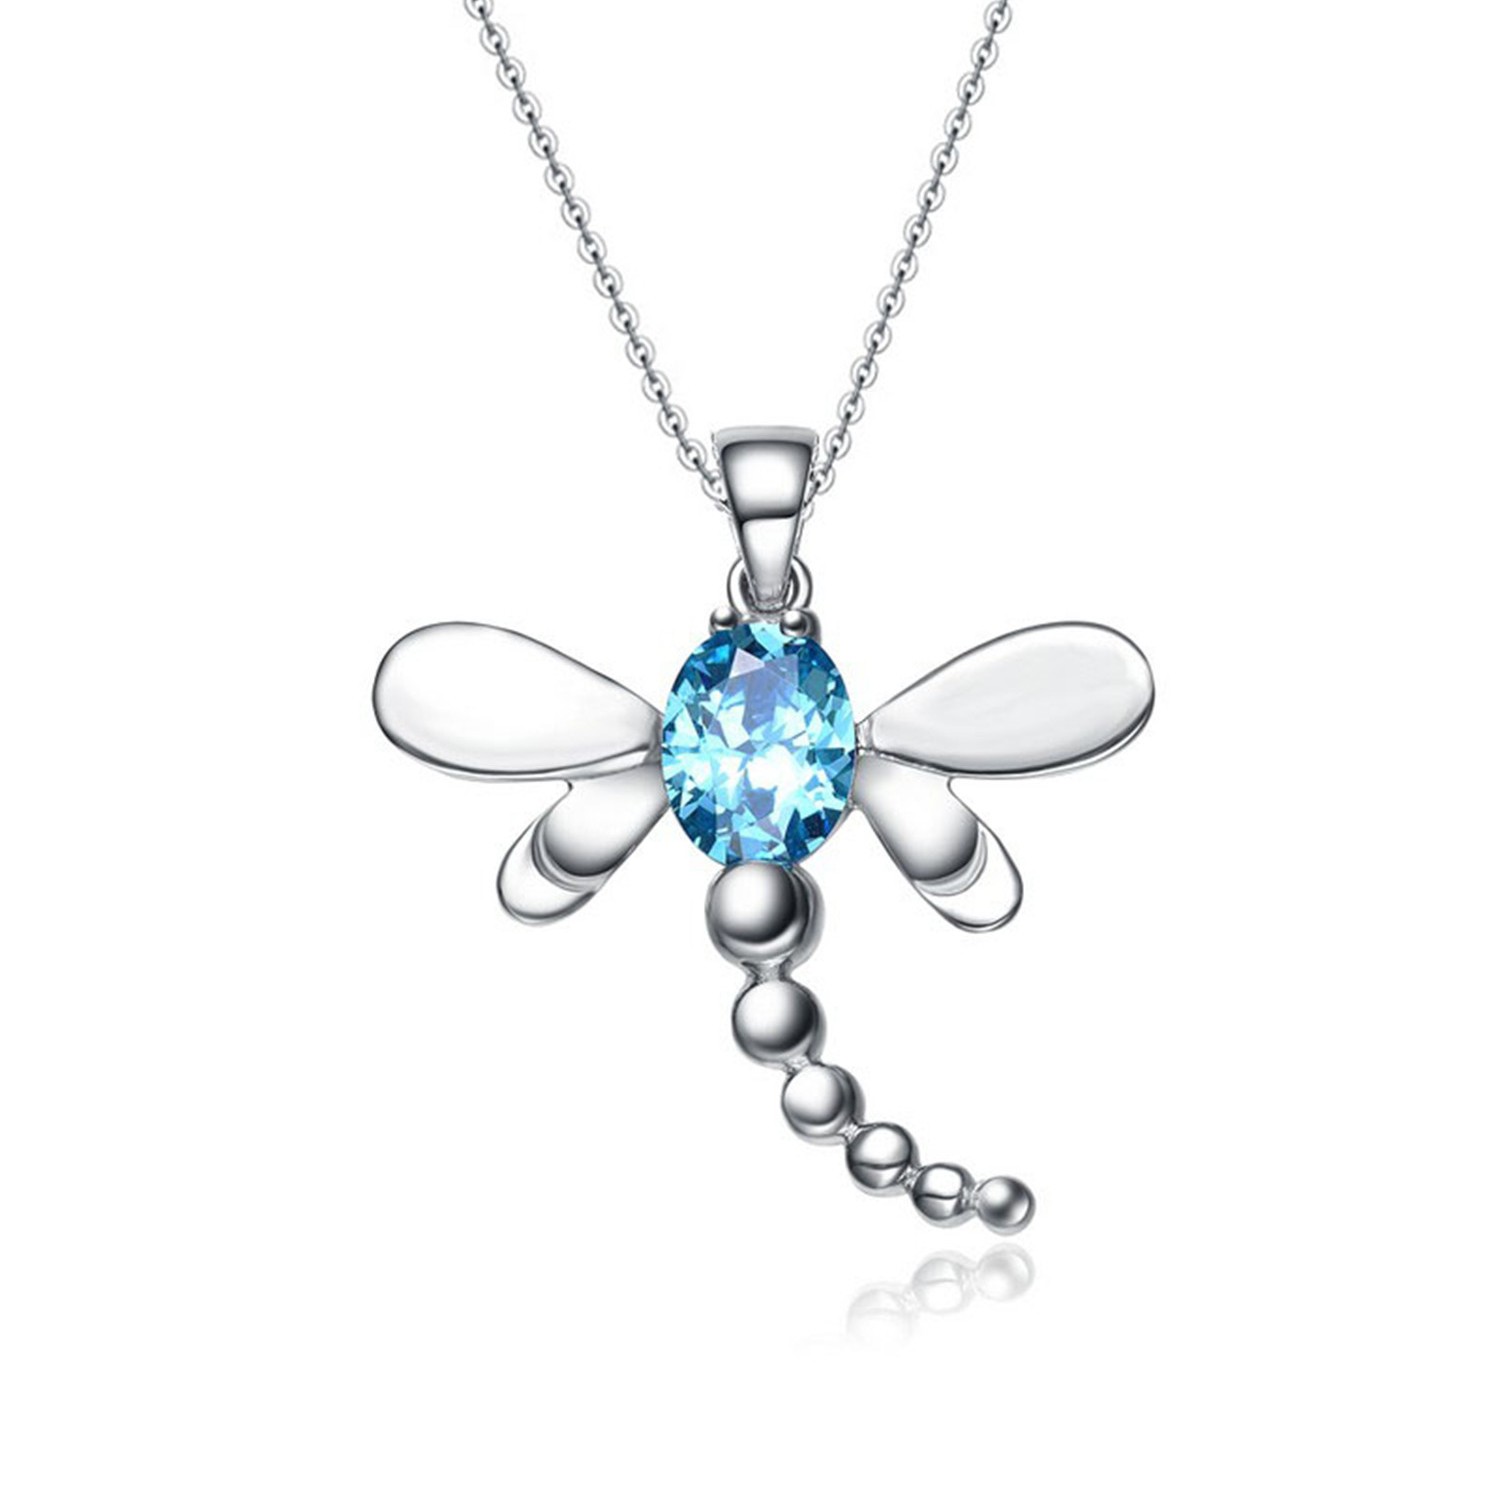 Wholesale Jewelry Necklace Women 925 Sterling Silver Cubic Zircon Dragonfly Cute Pendant Necklace